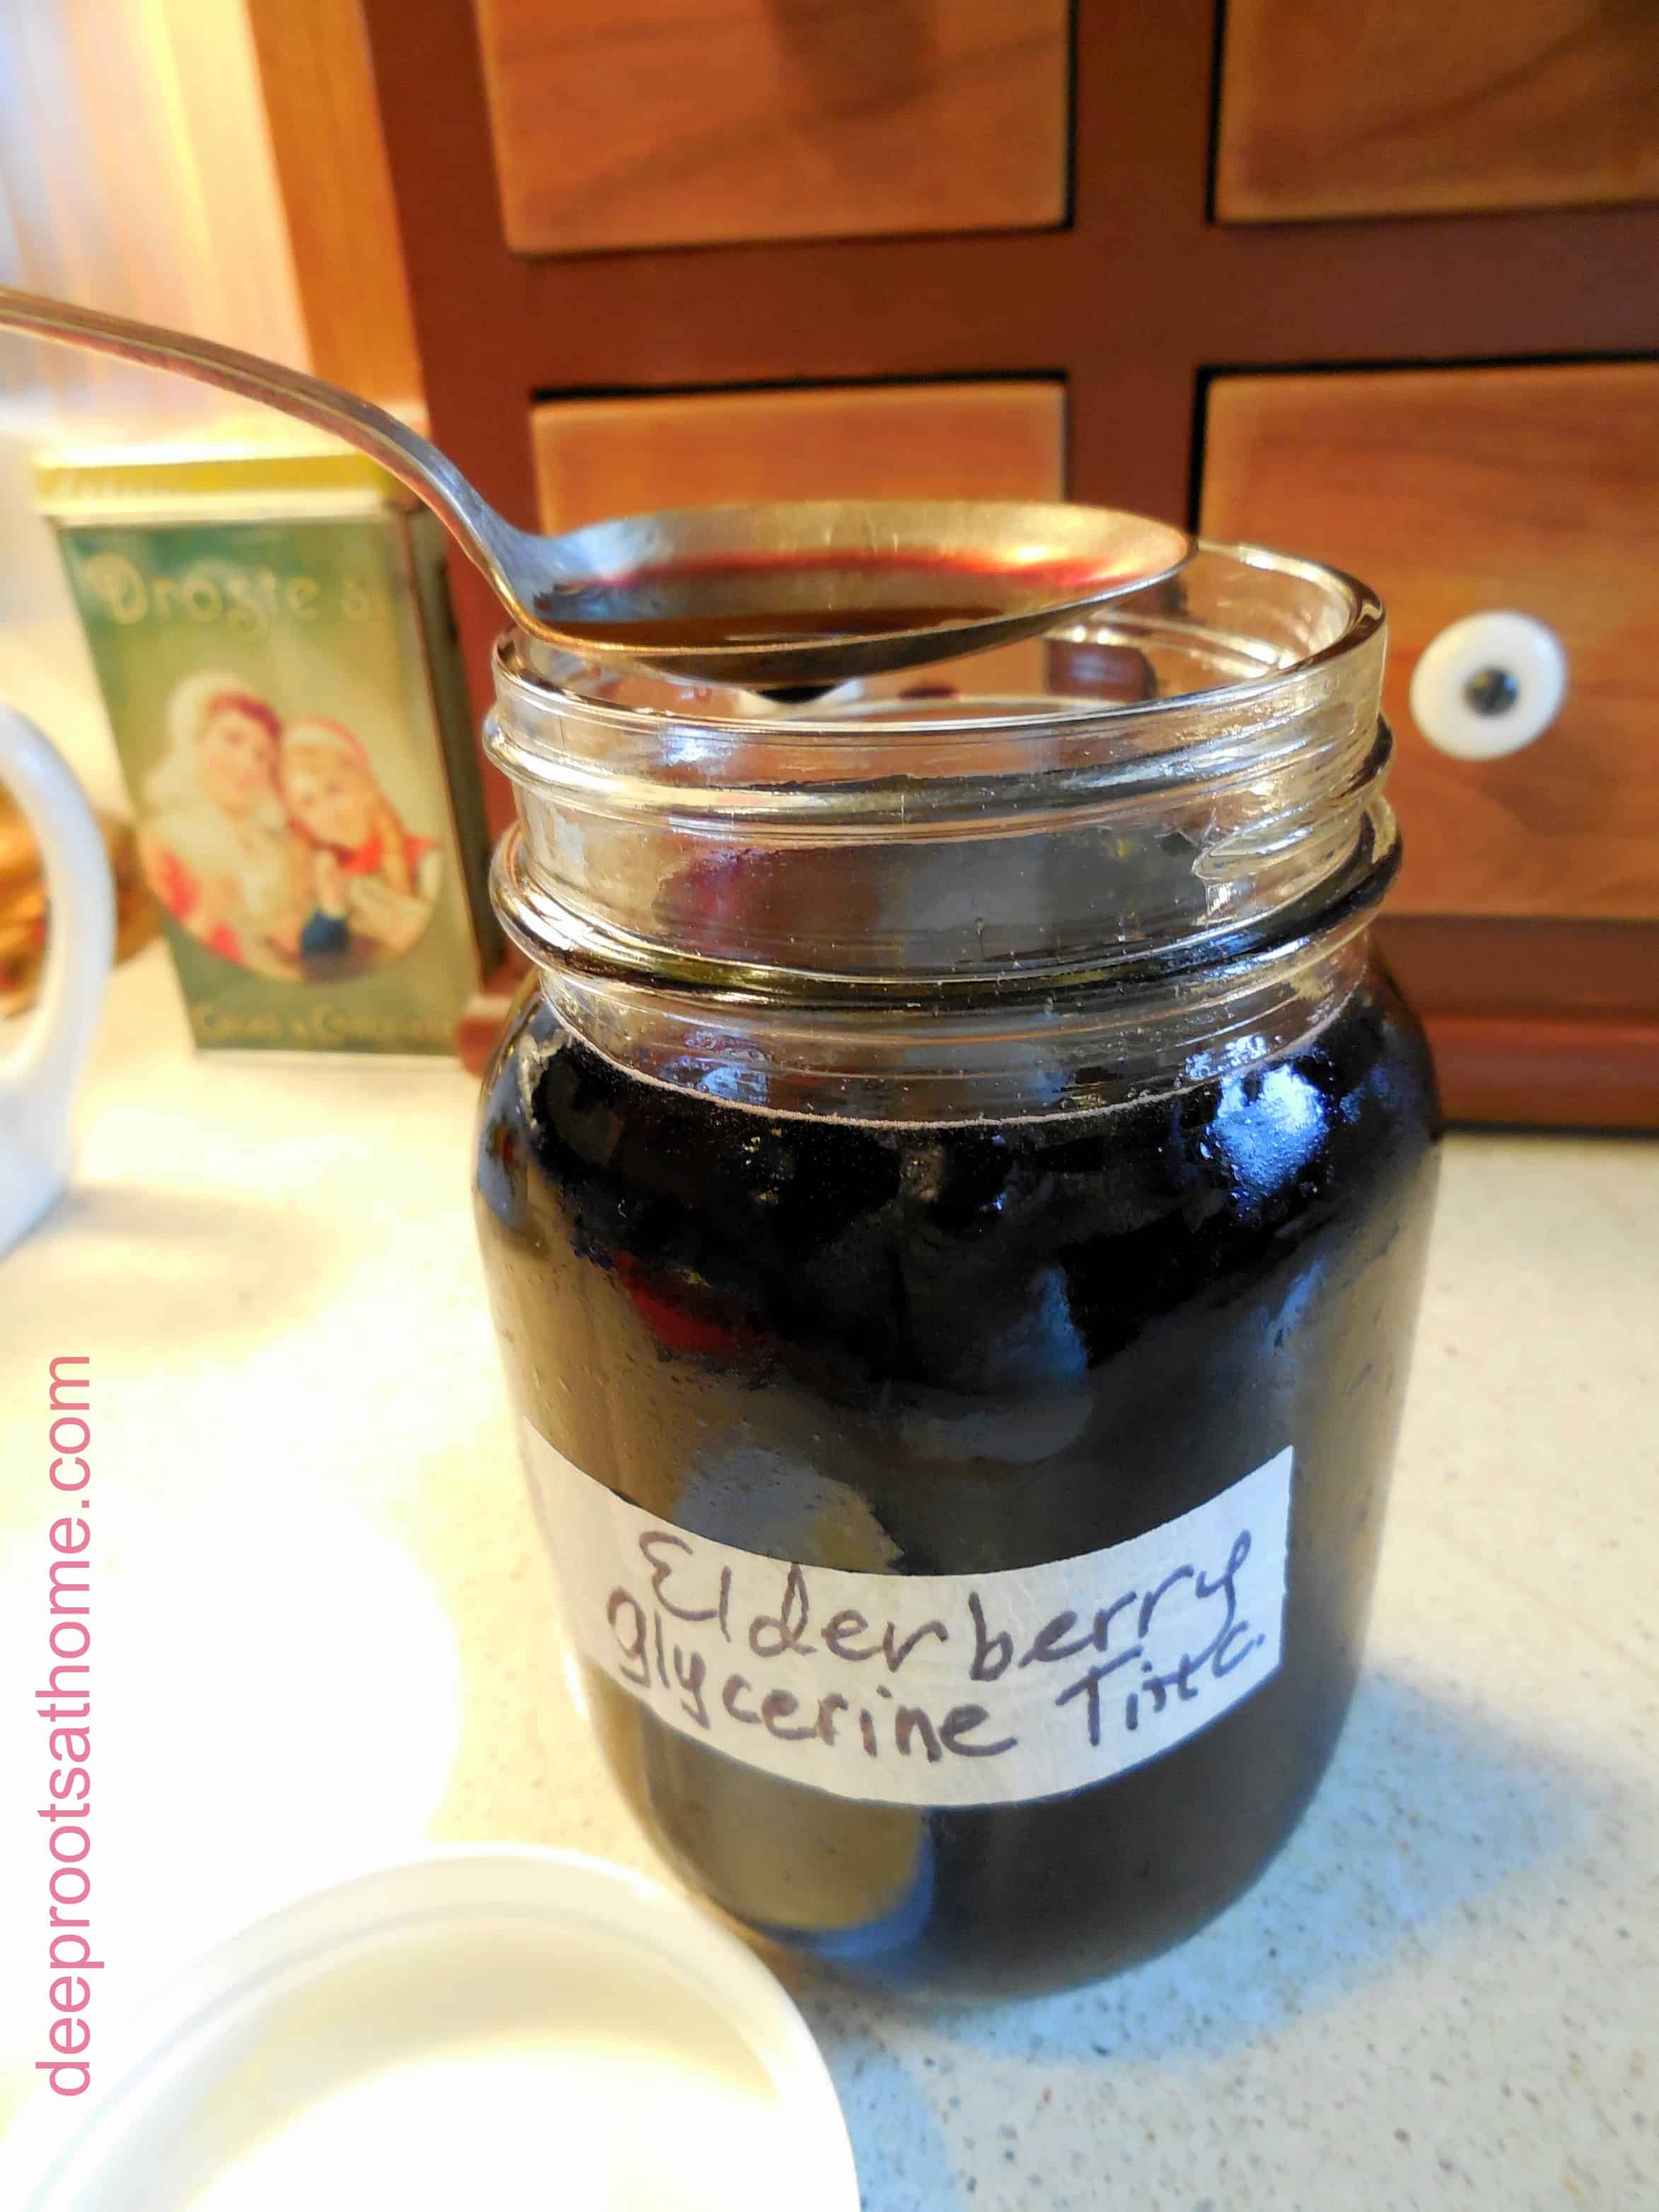  natural remedy glycerine syrup made from dried elderberries.